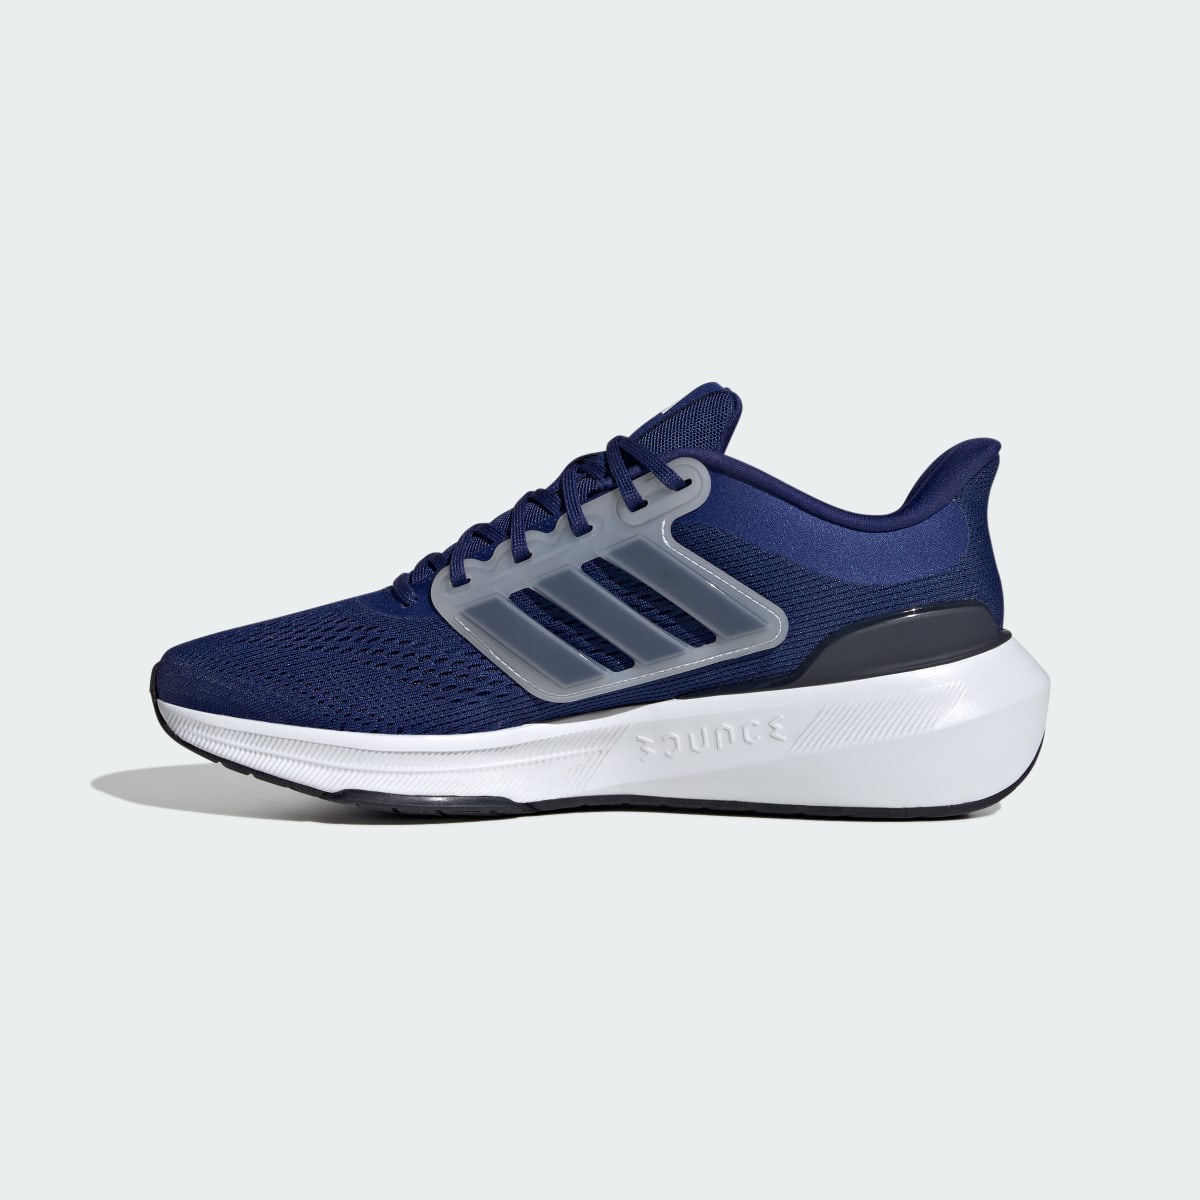 Adidas Ultrabounce Wide Shoes. 7